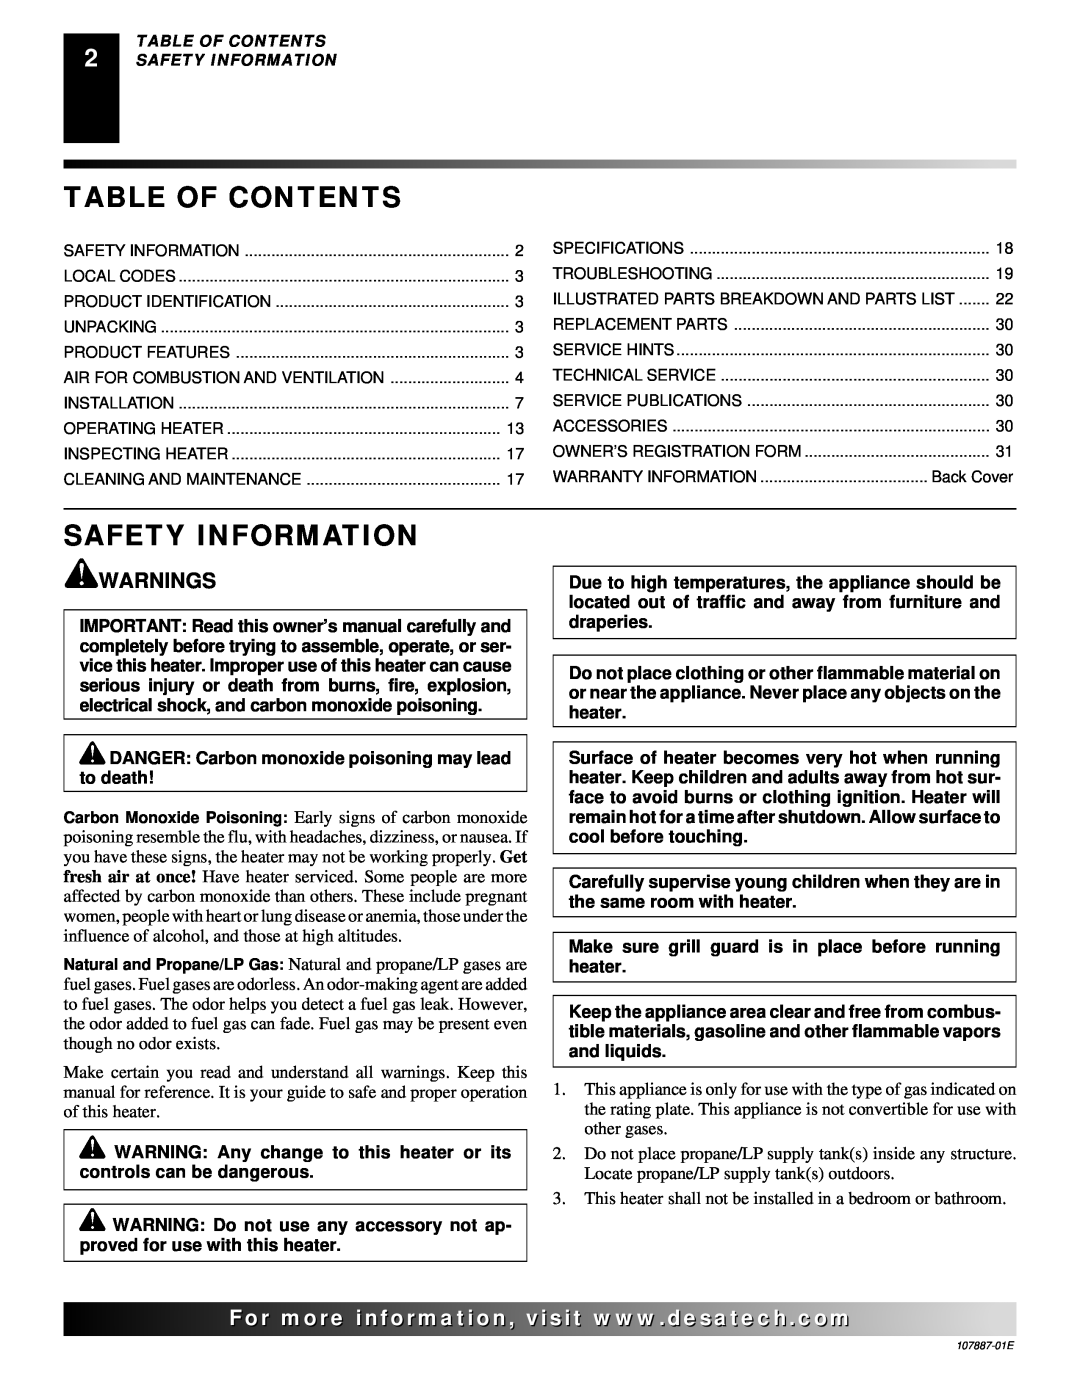 Desa VN30T, VP22IT, VP16IT, VP16T, VN25IT, VP26T, VN18T, VN18IT Table Of Contents, Safety Information, Warnings 